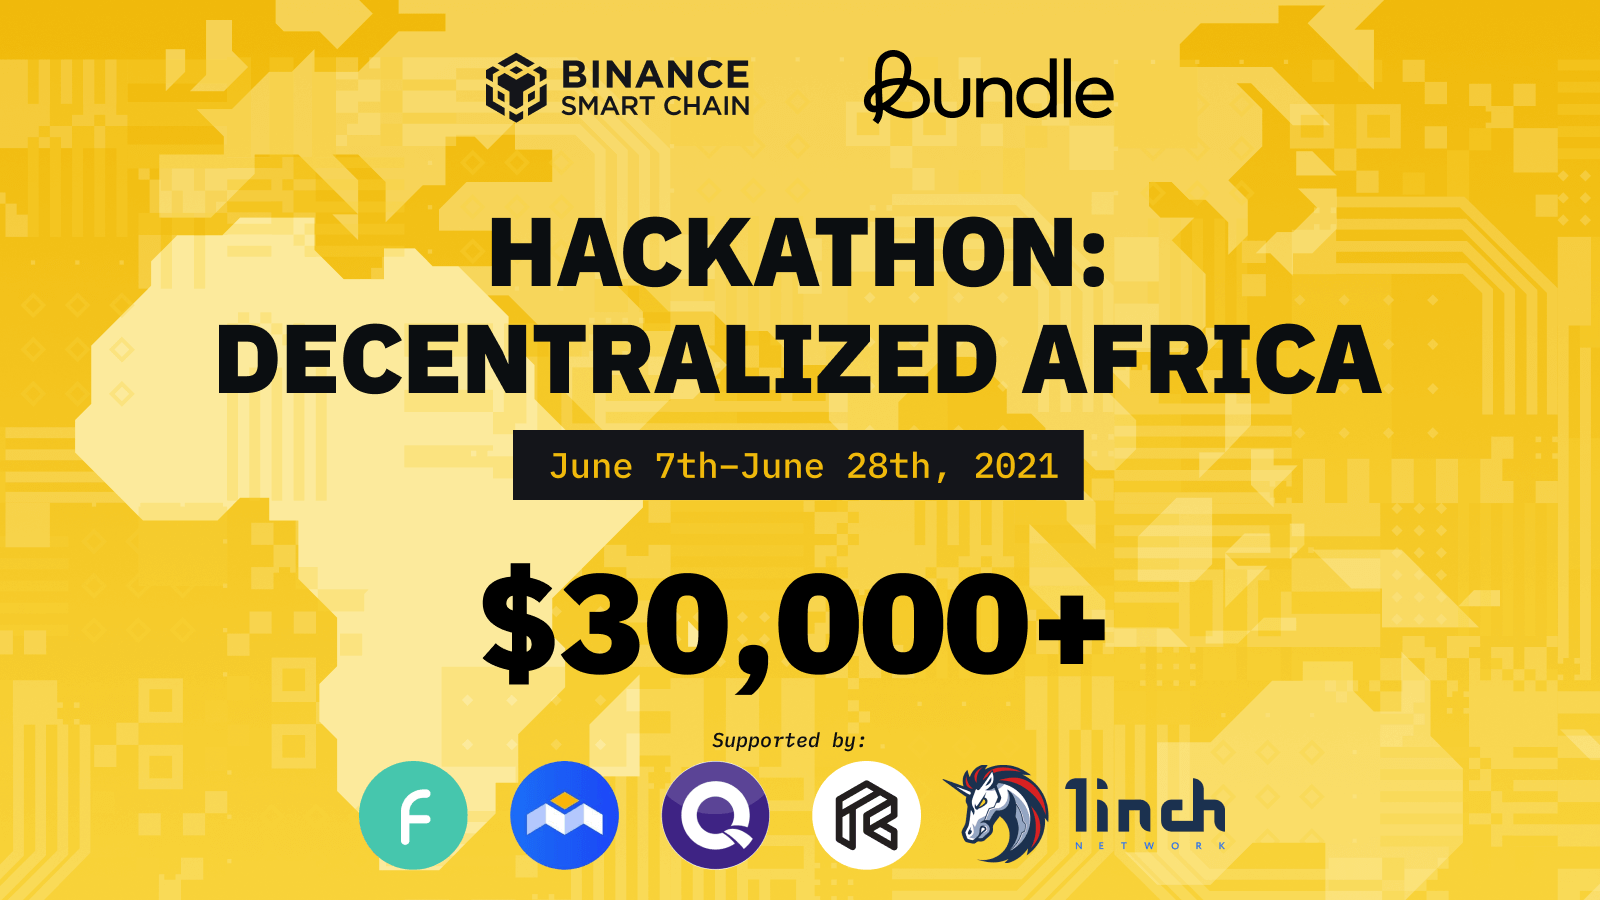 Binance Hackathon participants stand to win up to USD 30,000